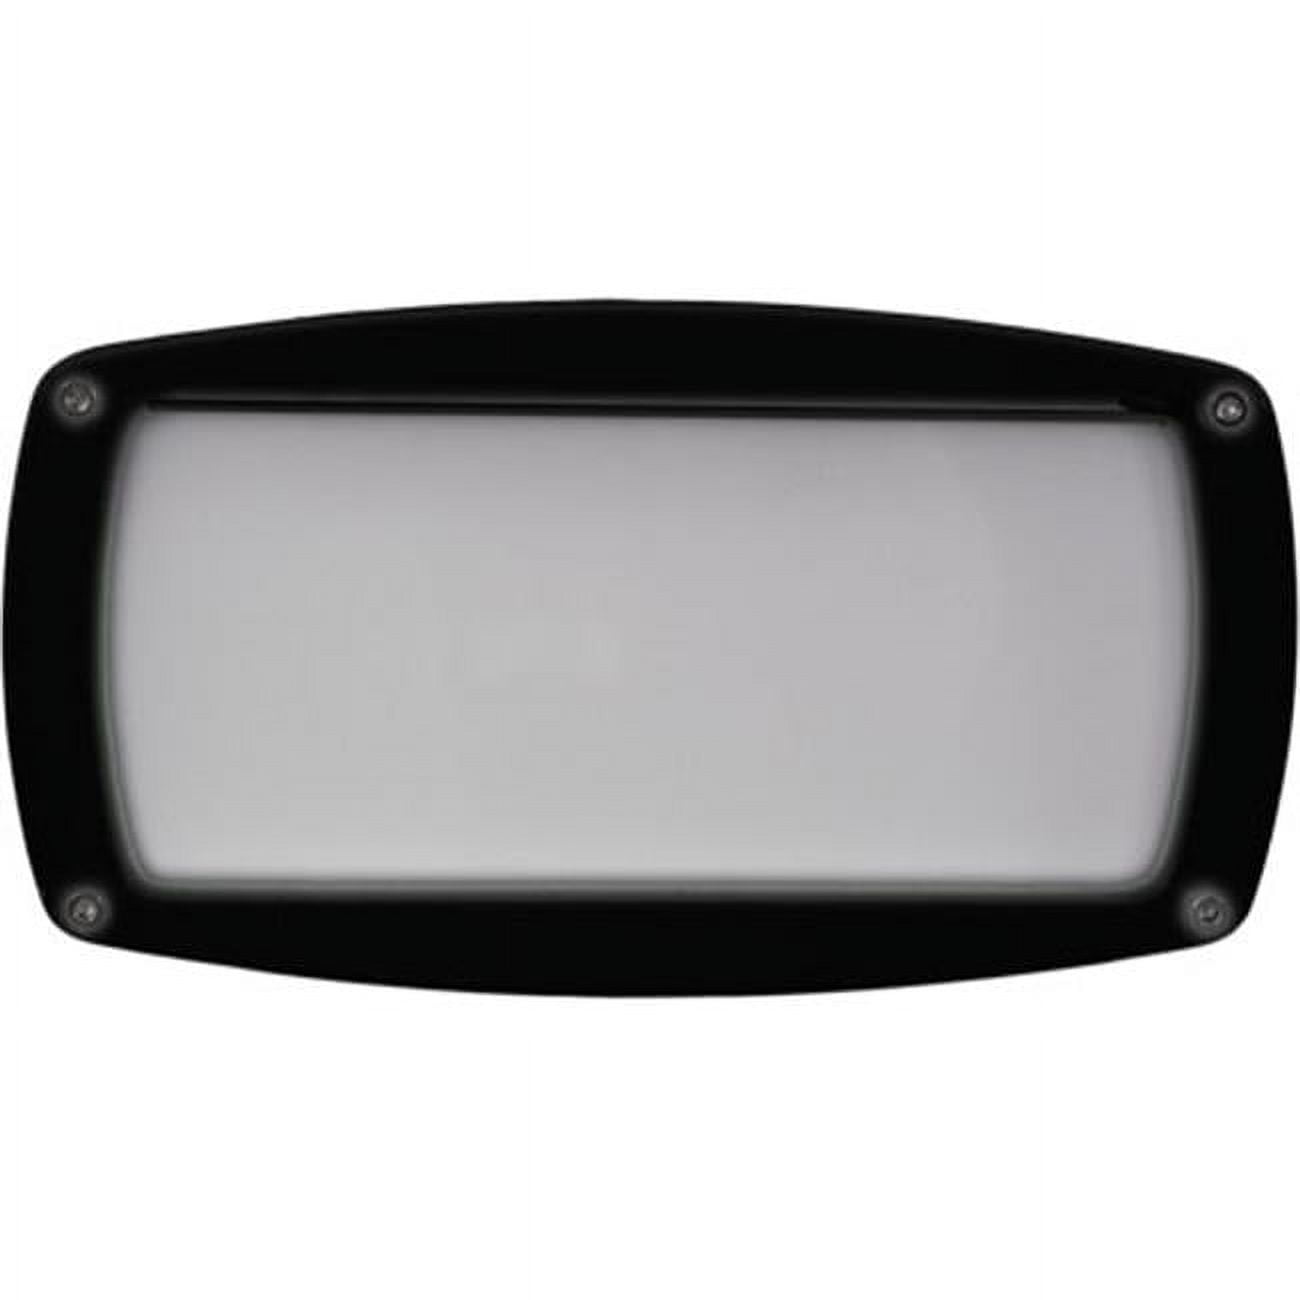 Picture of Dabmar Lighting DSL1016-B Recessed Open Face Brick, Step & Wall Light, Black - 5 x 9 x 3.90 in.